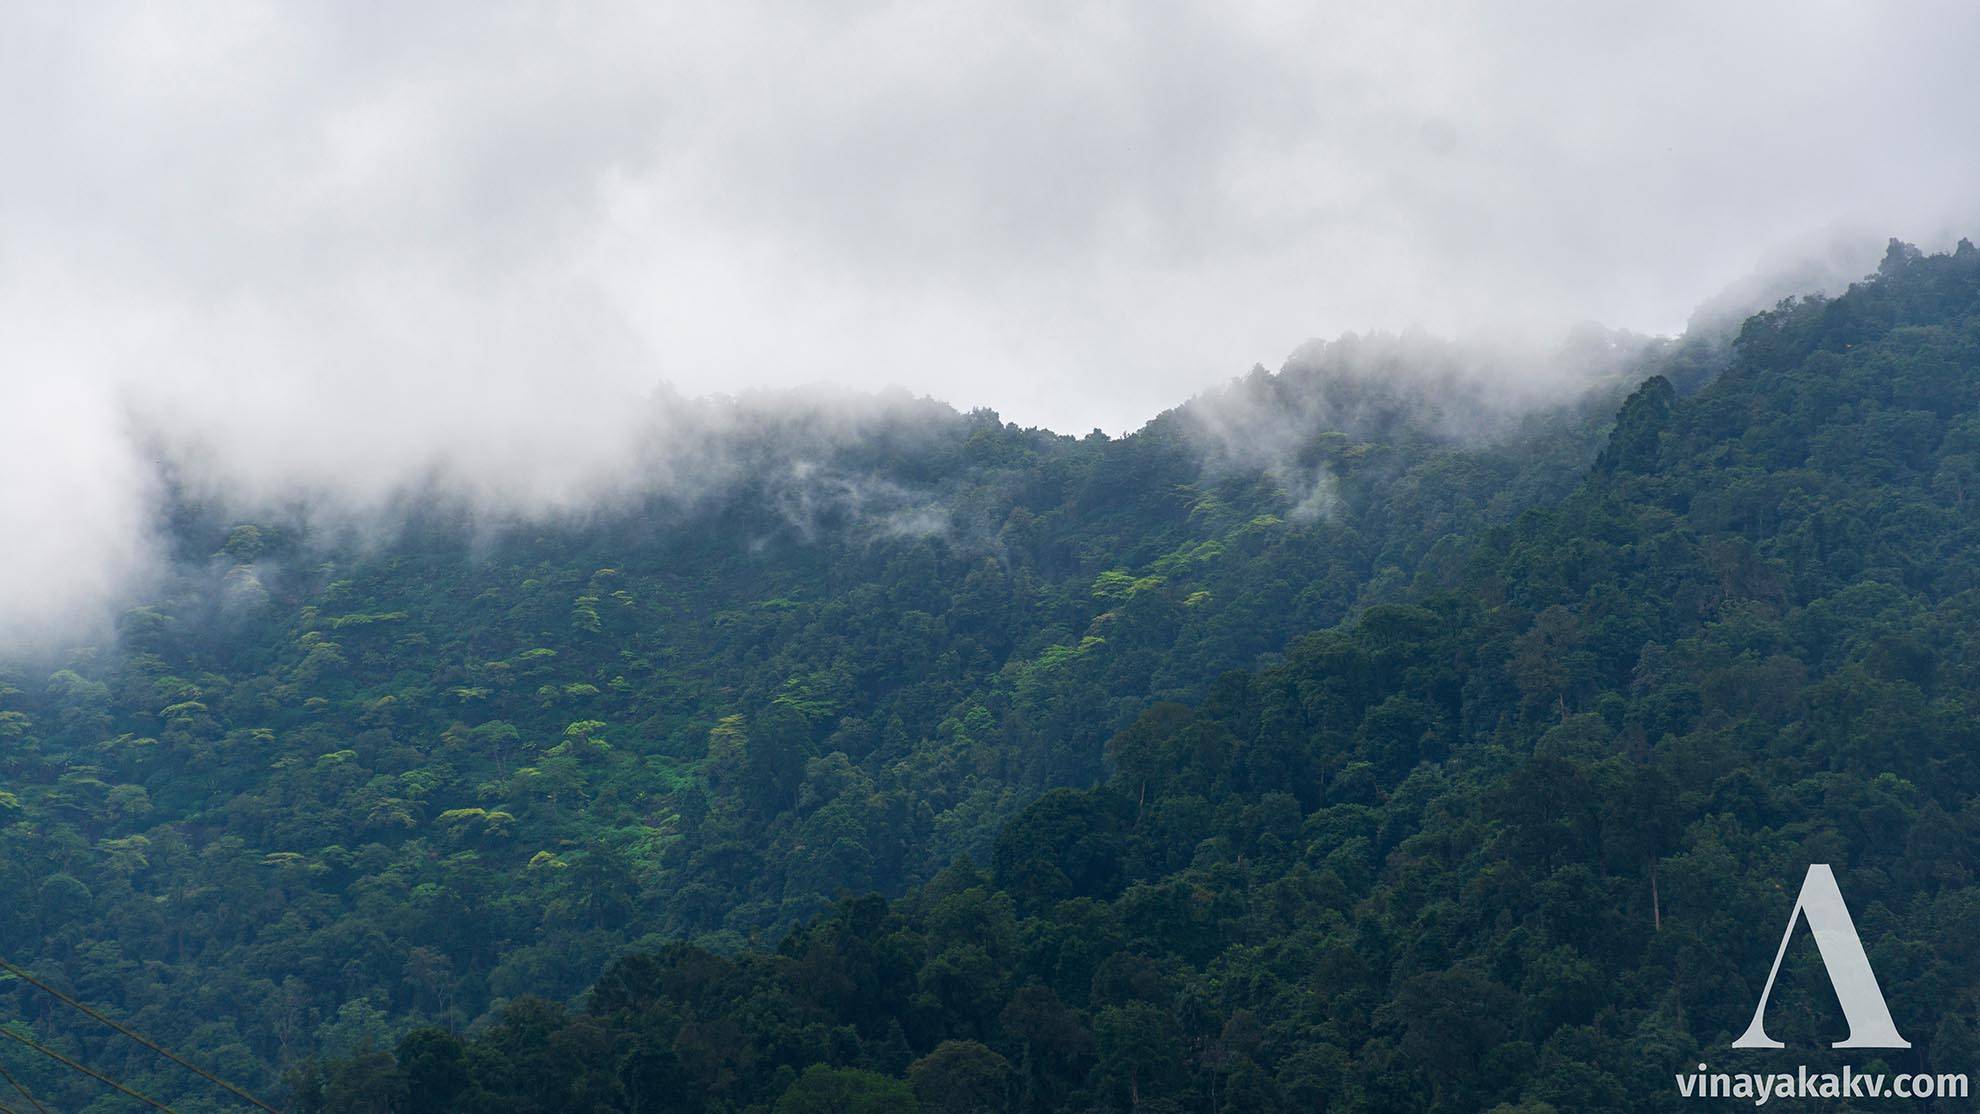 Hills of the *Agumbe* Ghat with broad-crowned trees lit-up